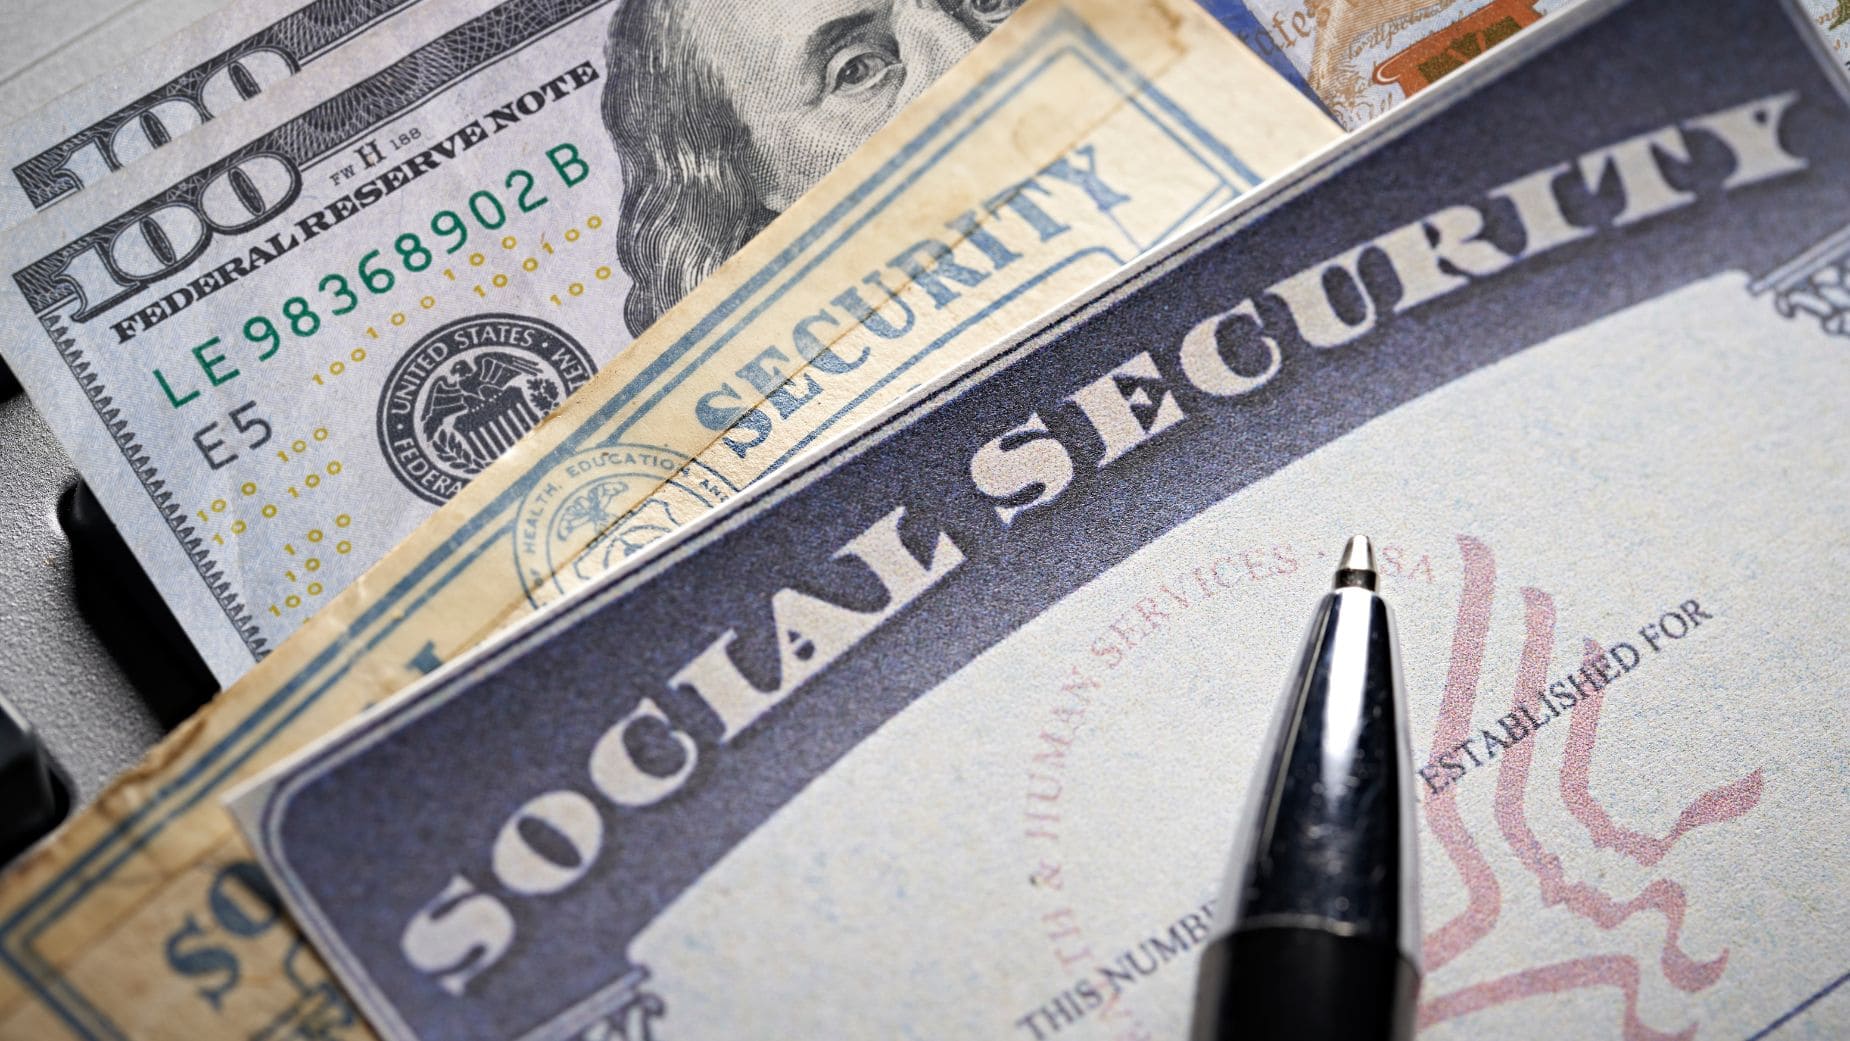 If you do not meet the requirements you will not get the Social Security check in the next days